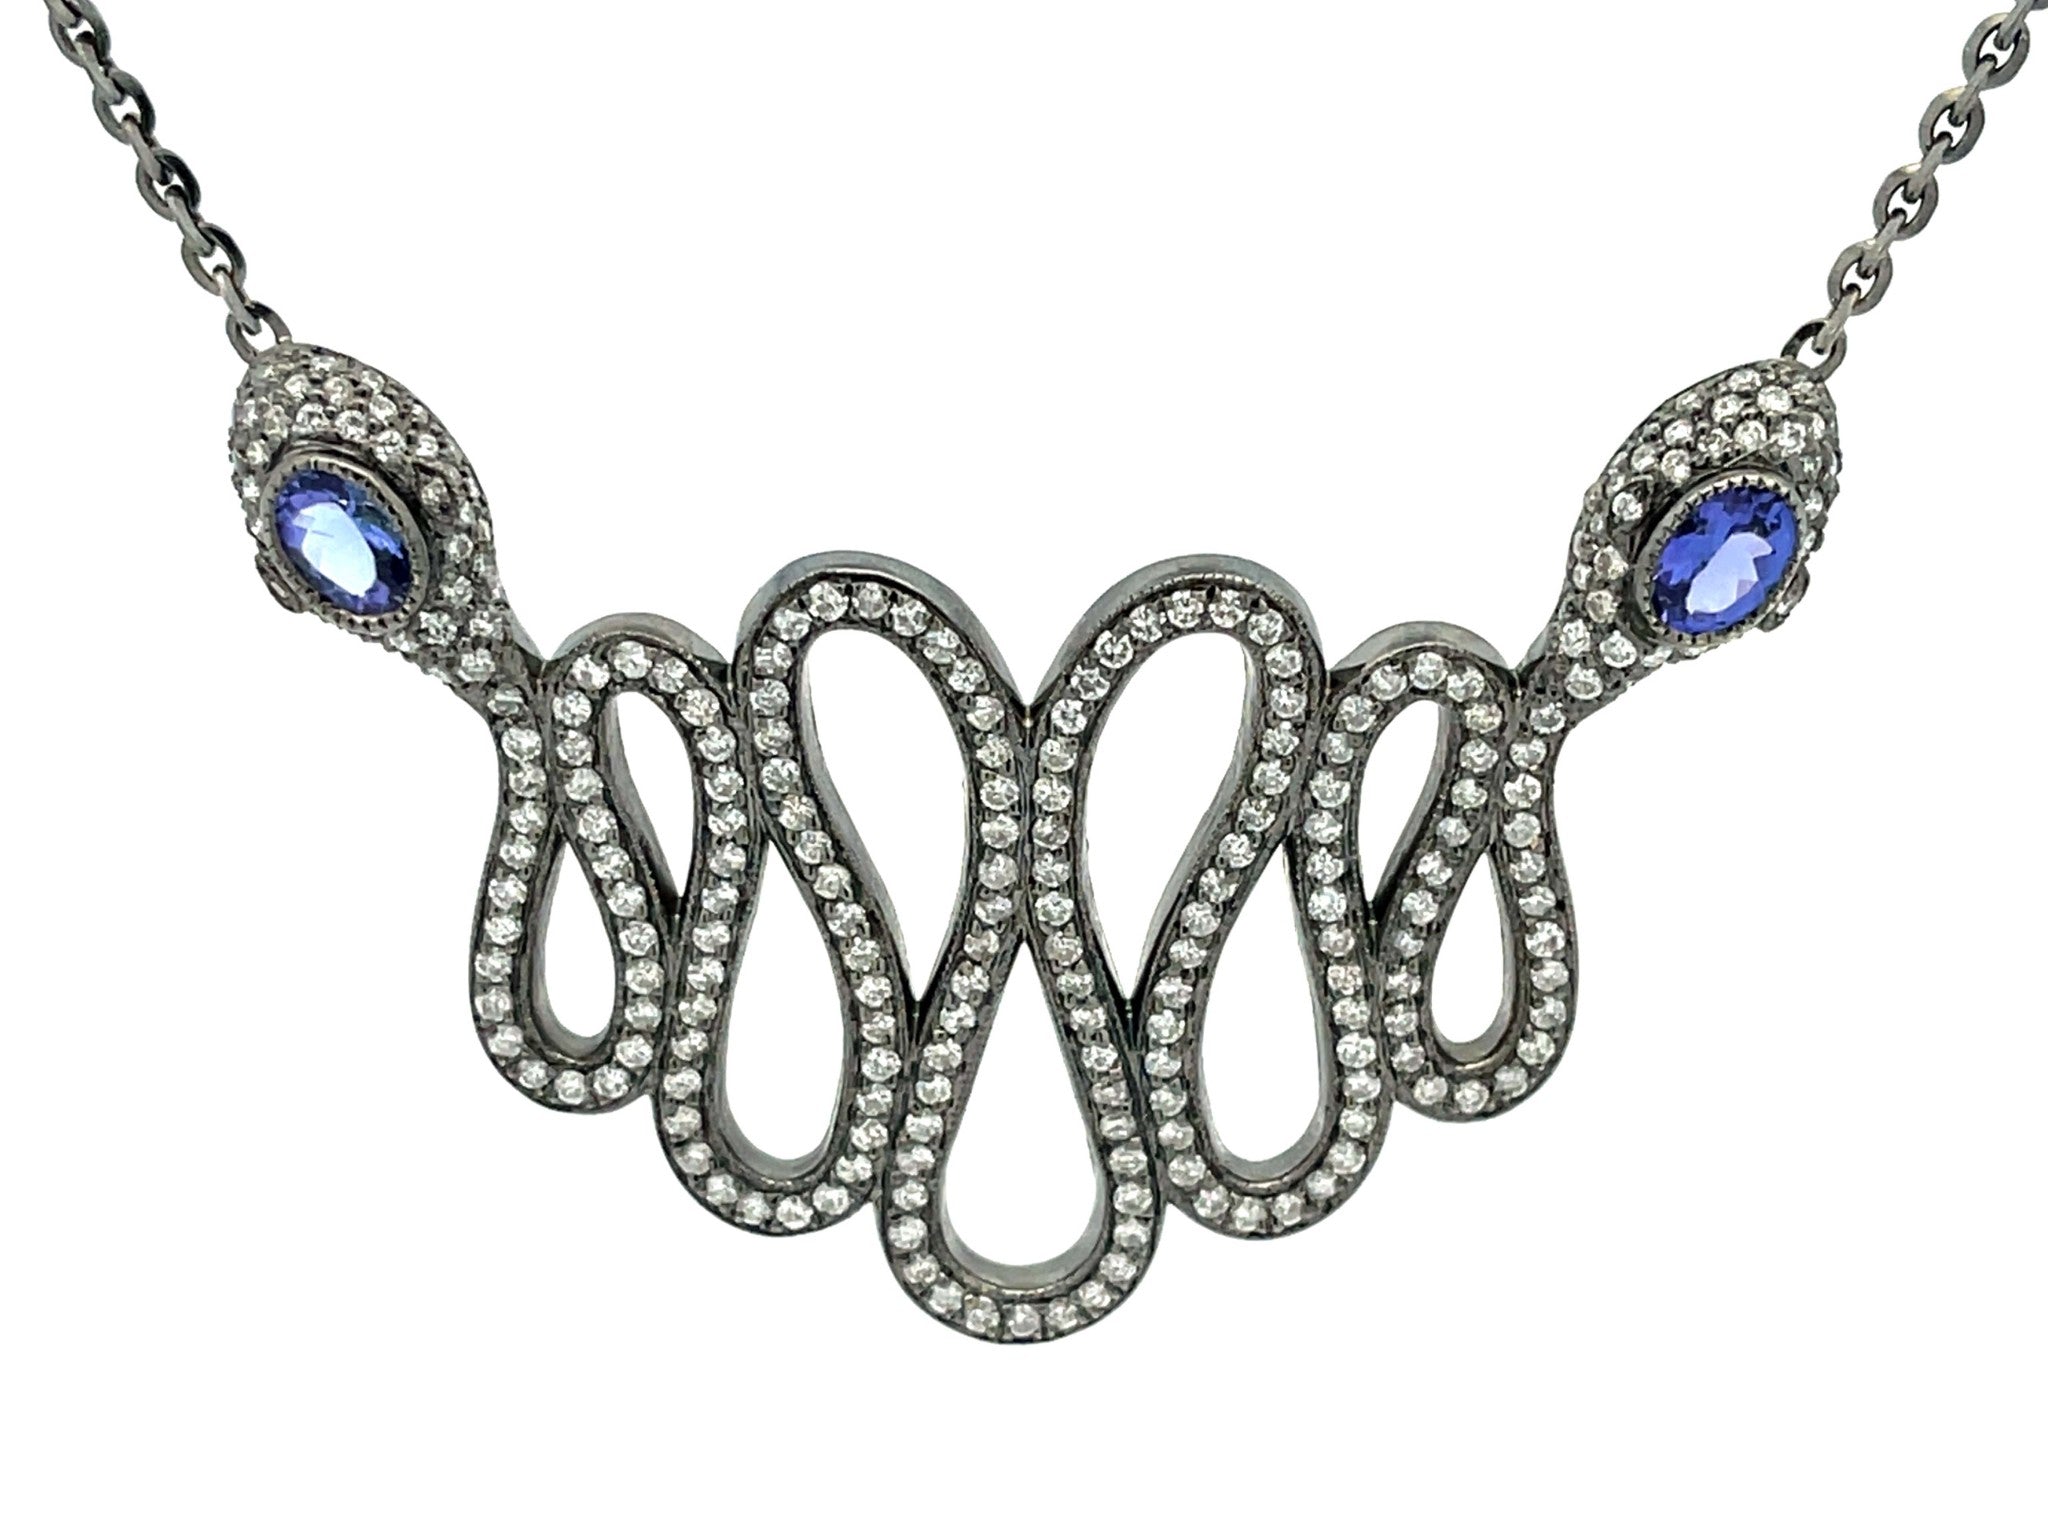 Snake Necklace with Diamonds and Tanzanite in 18k Black Gold